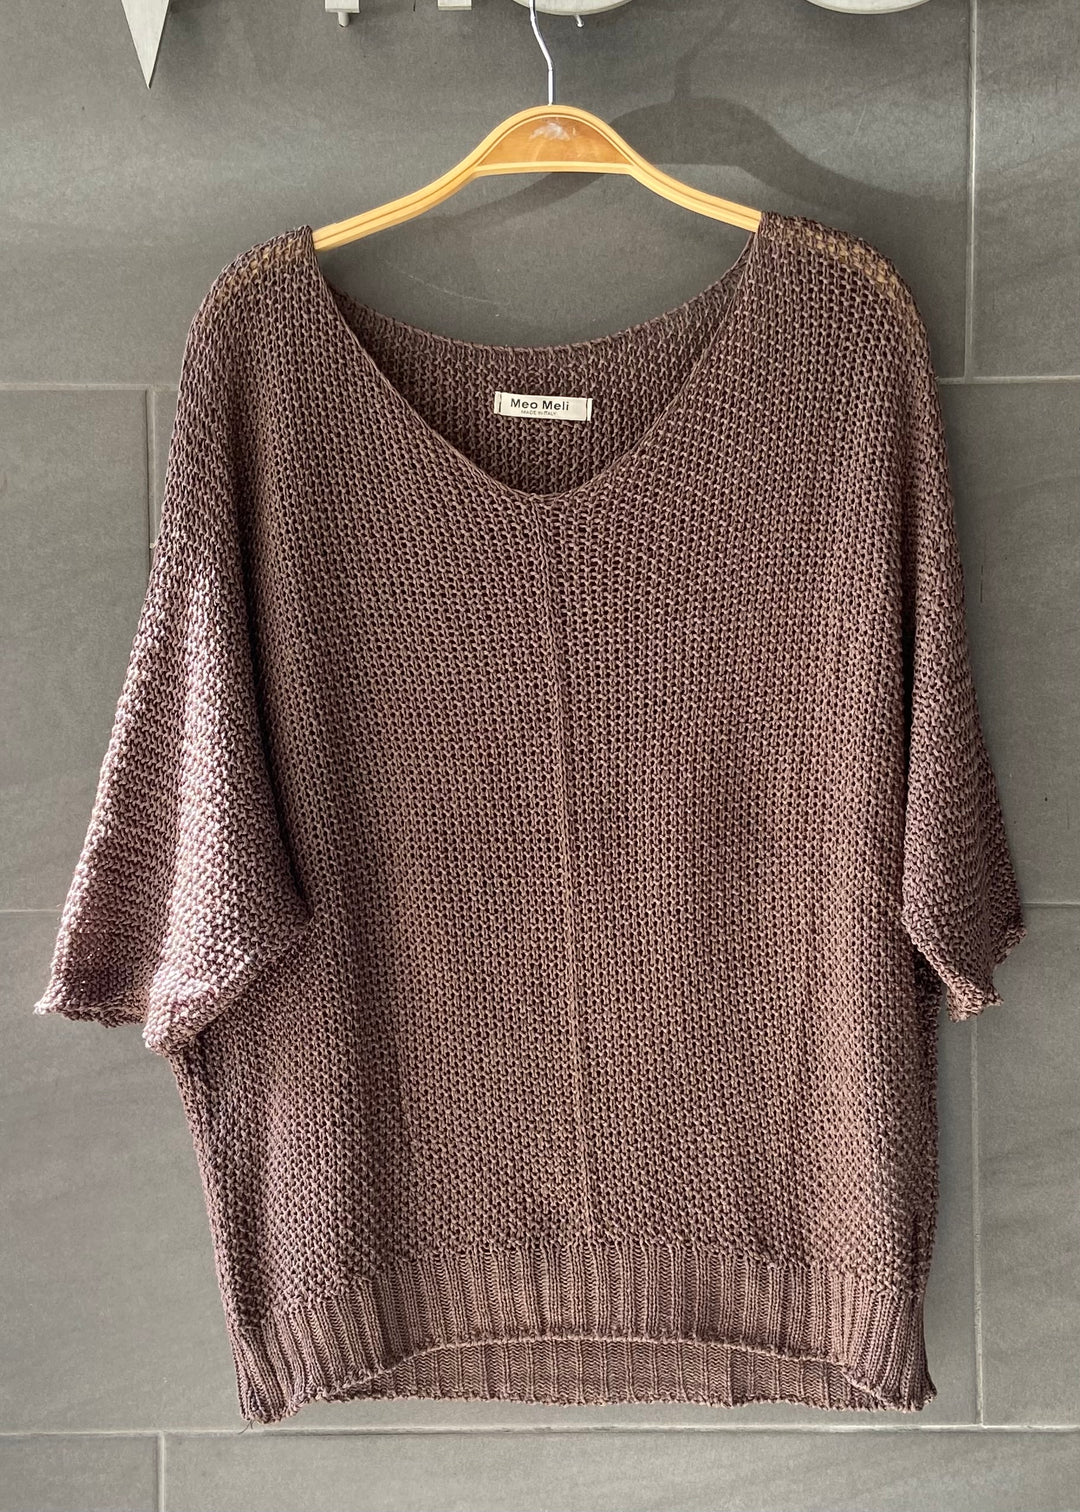 Meo Loose Knit Sweater (Cocoa)